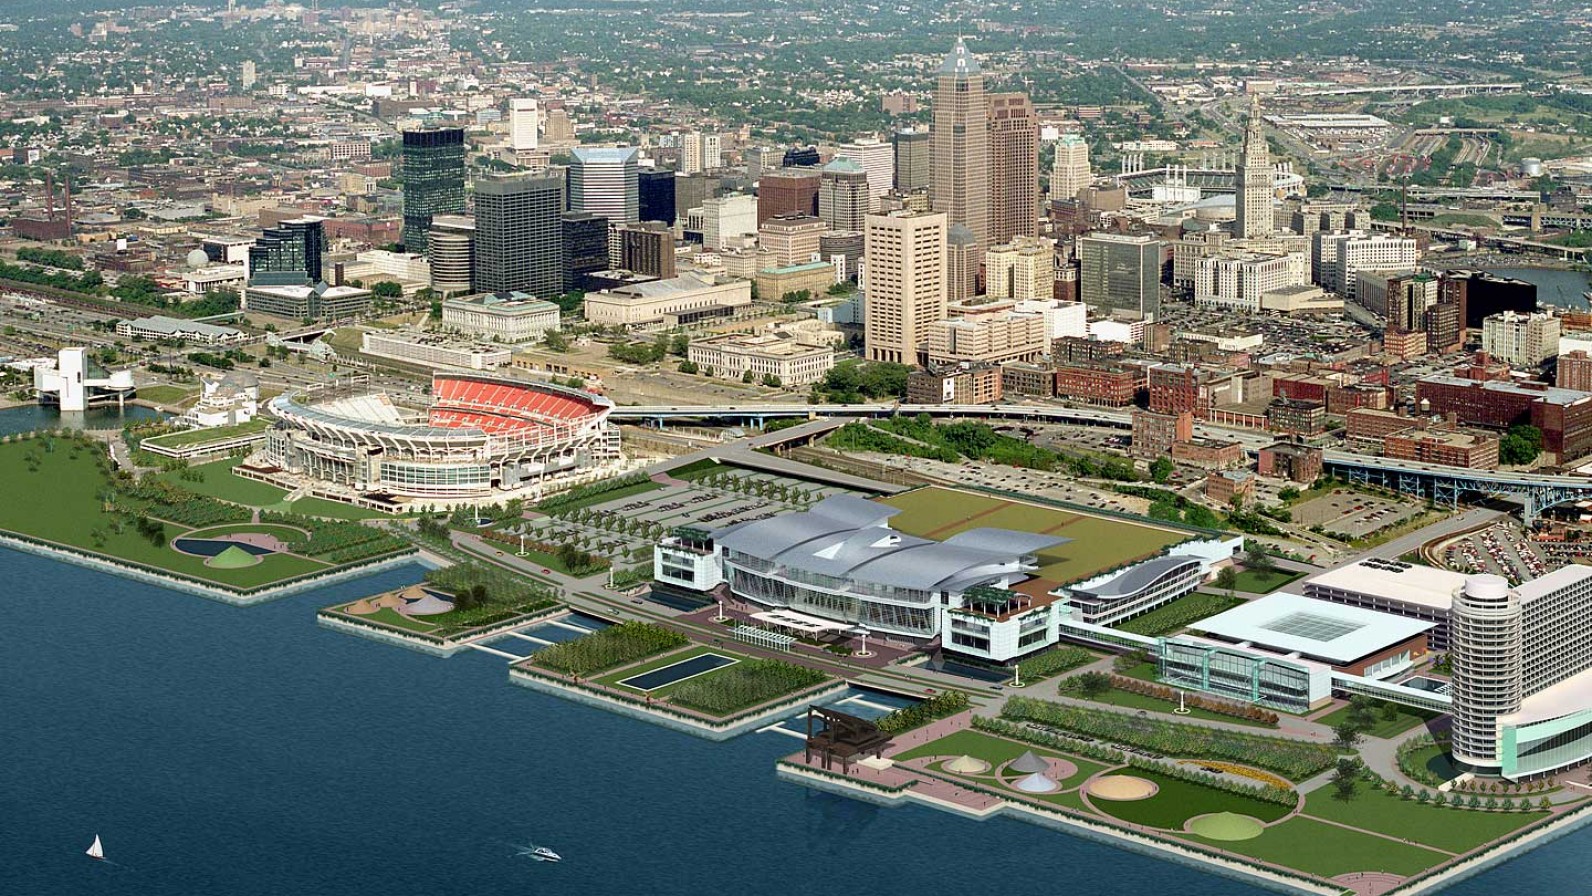 planbdesign.net rendering of an architectural competition entry for the cleveland convention center water front development